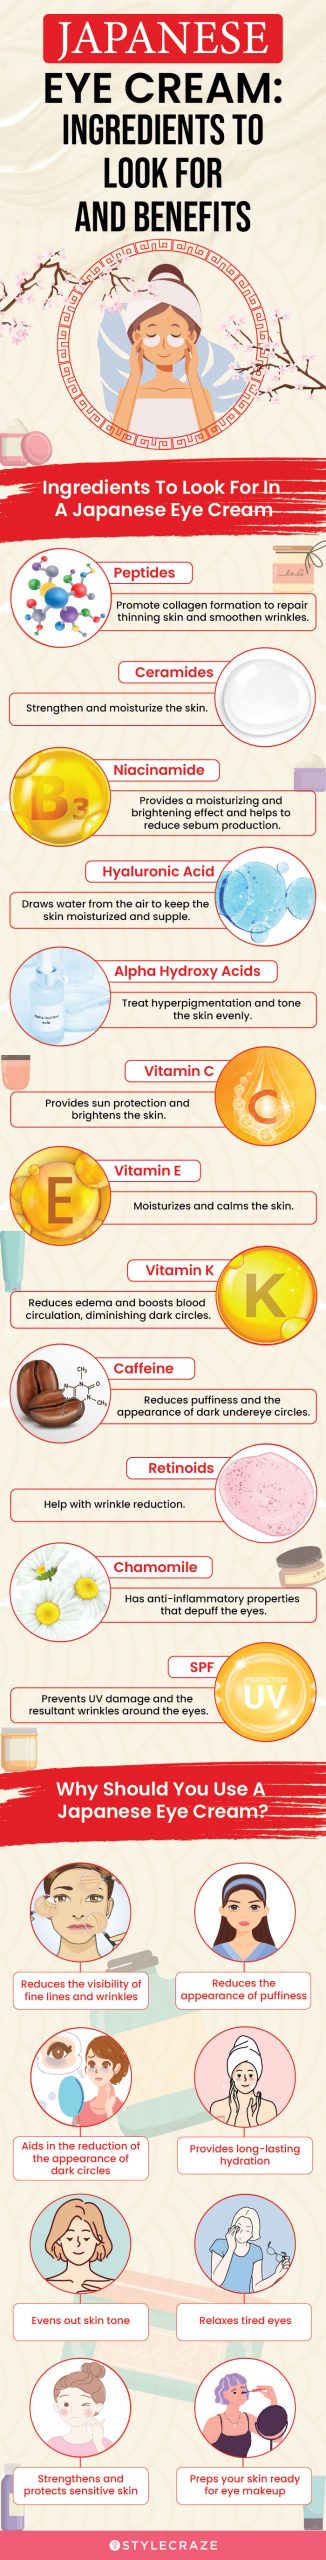 Japanese Eye Cream: Ingredients To Look For (infographic)